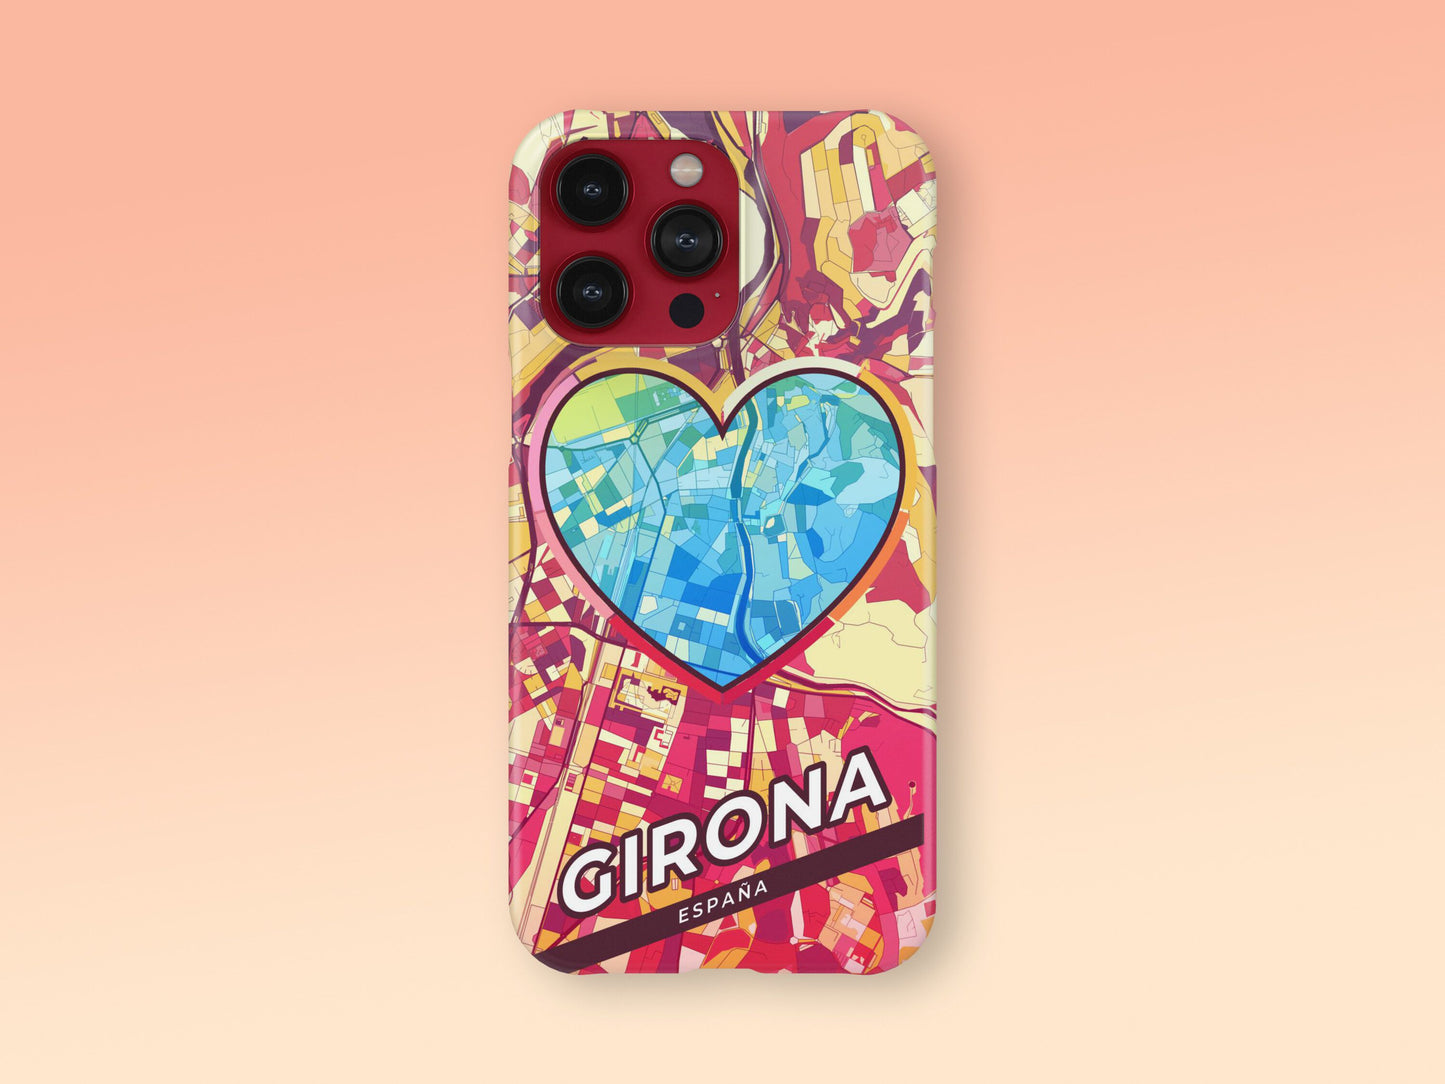 Girona Spain slim phone case with colorful icon. Birthday, wedding or housewarming gift. Couple match cases. 2